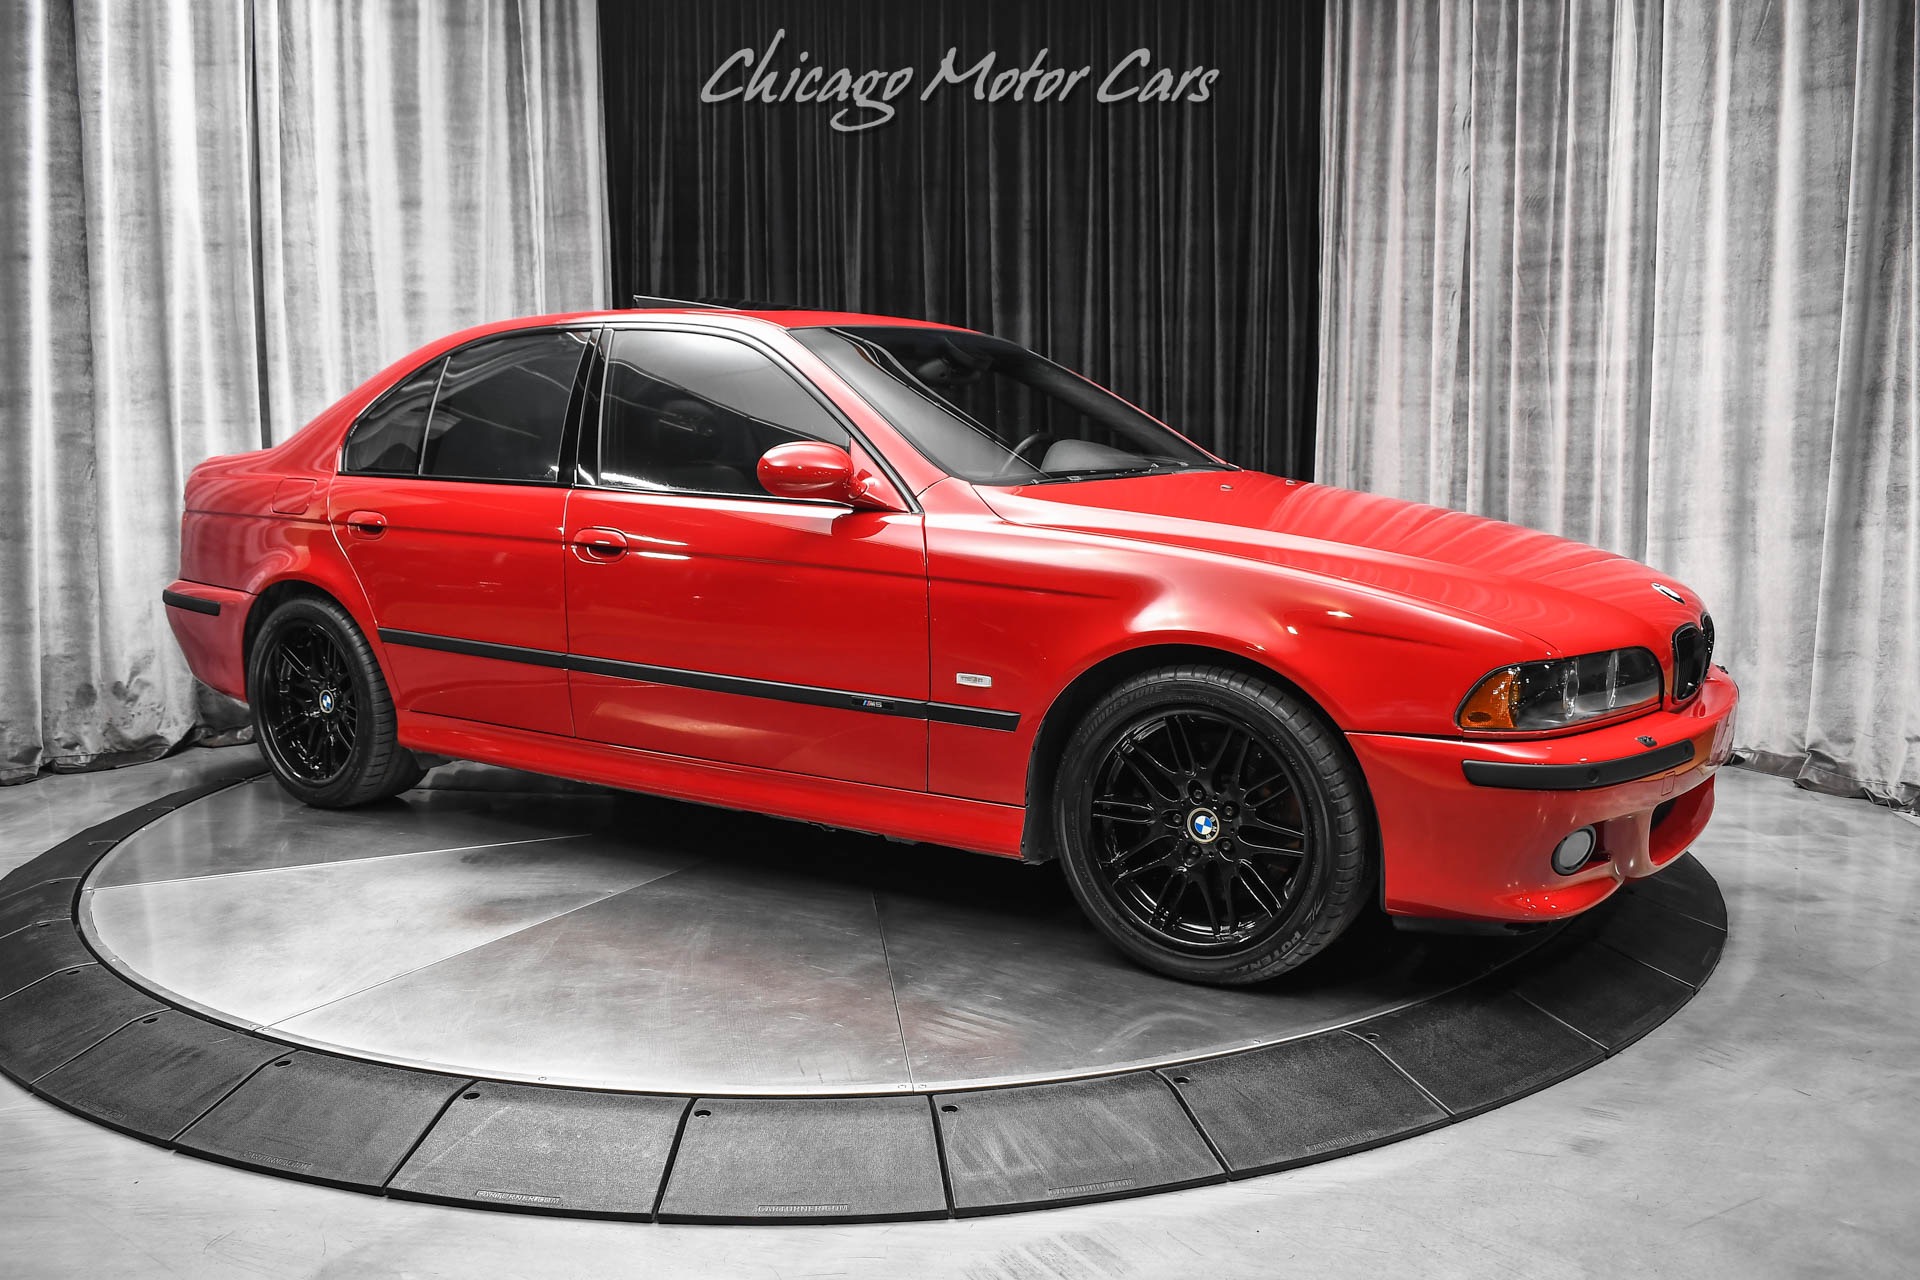 Used-2002-BMW-M5-Sedan-6-SPEED-MANUAL-FULLY-SERVICED-INCREDIBLE-CONDITION-RARE-SPEC